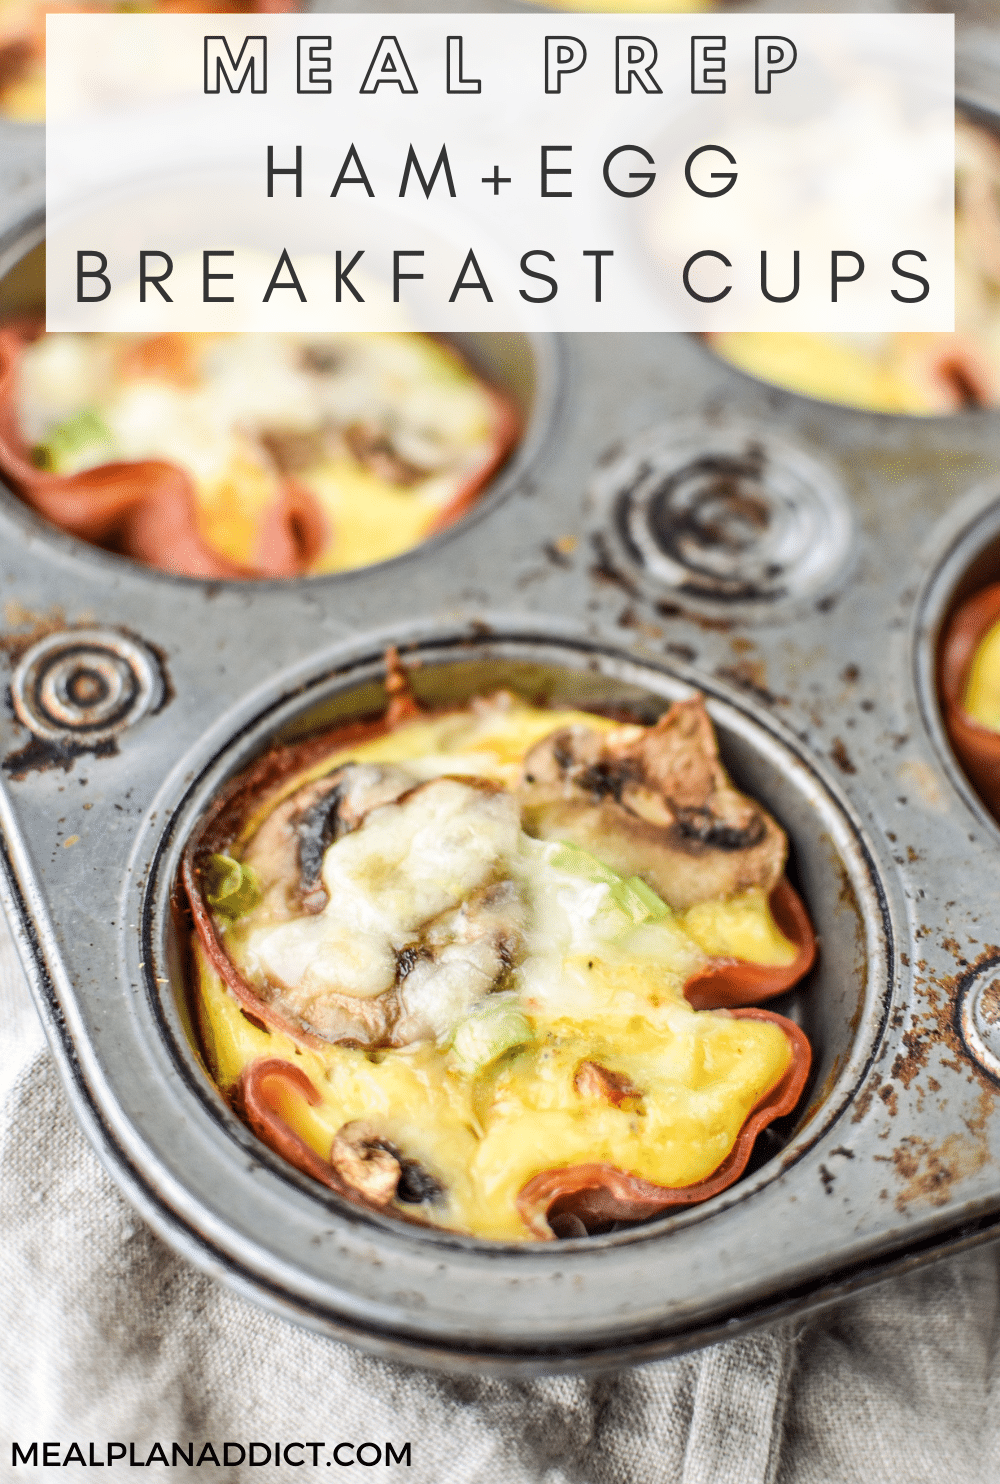 Breakfast cup pin for Pinterest